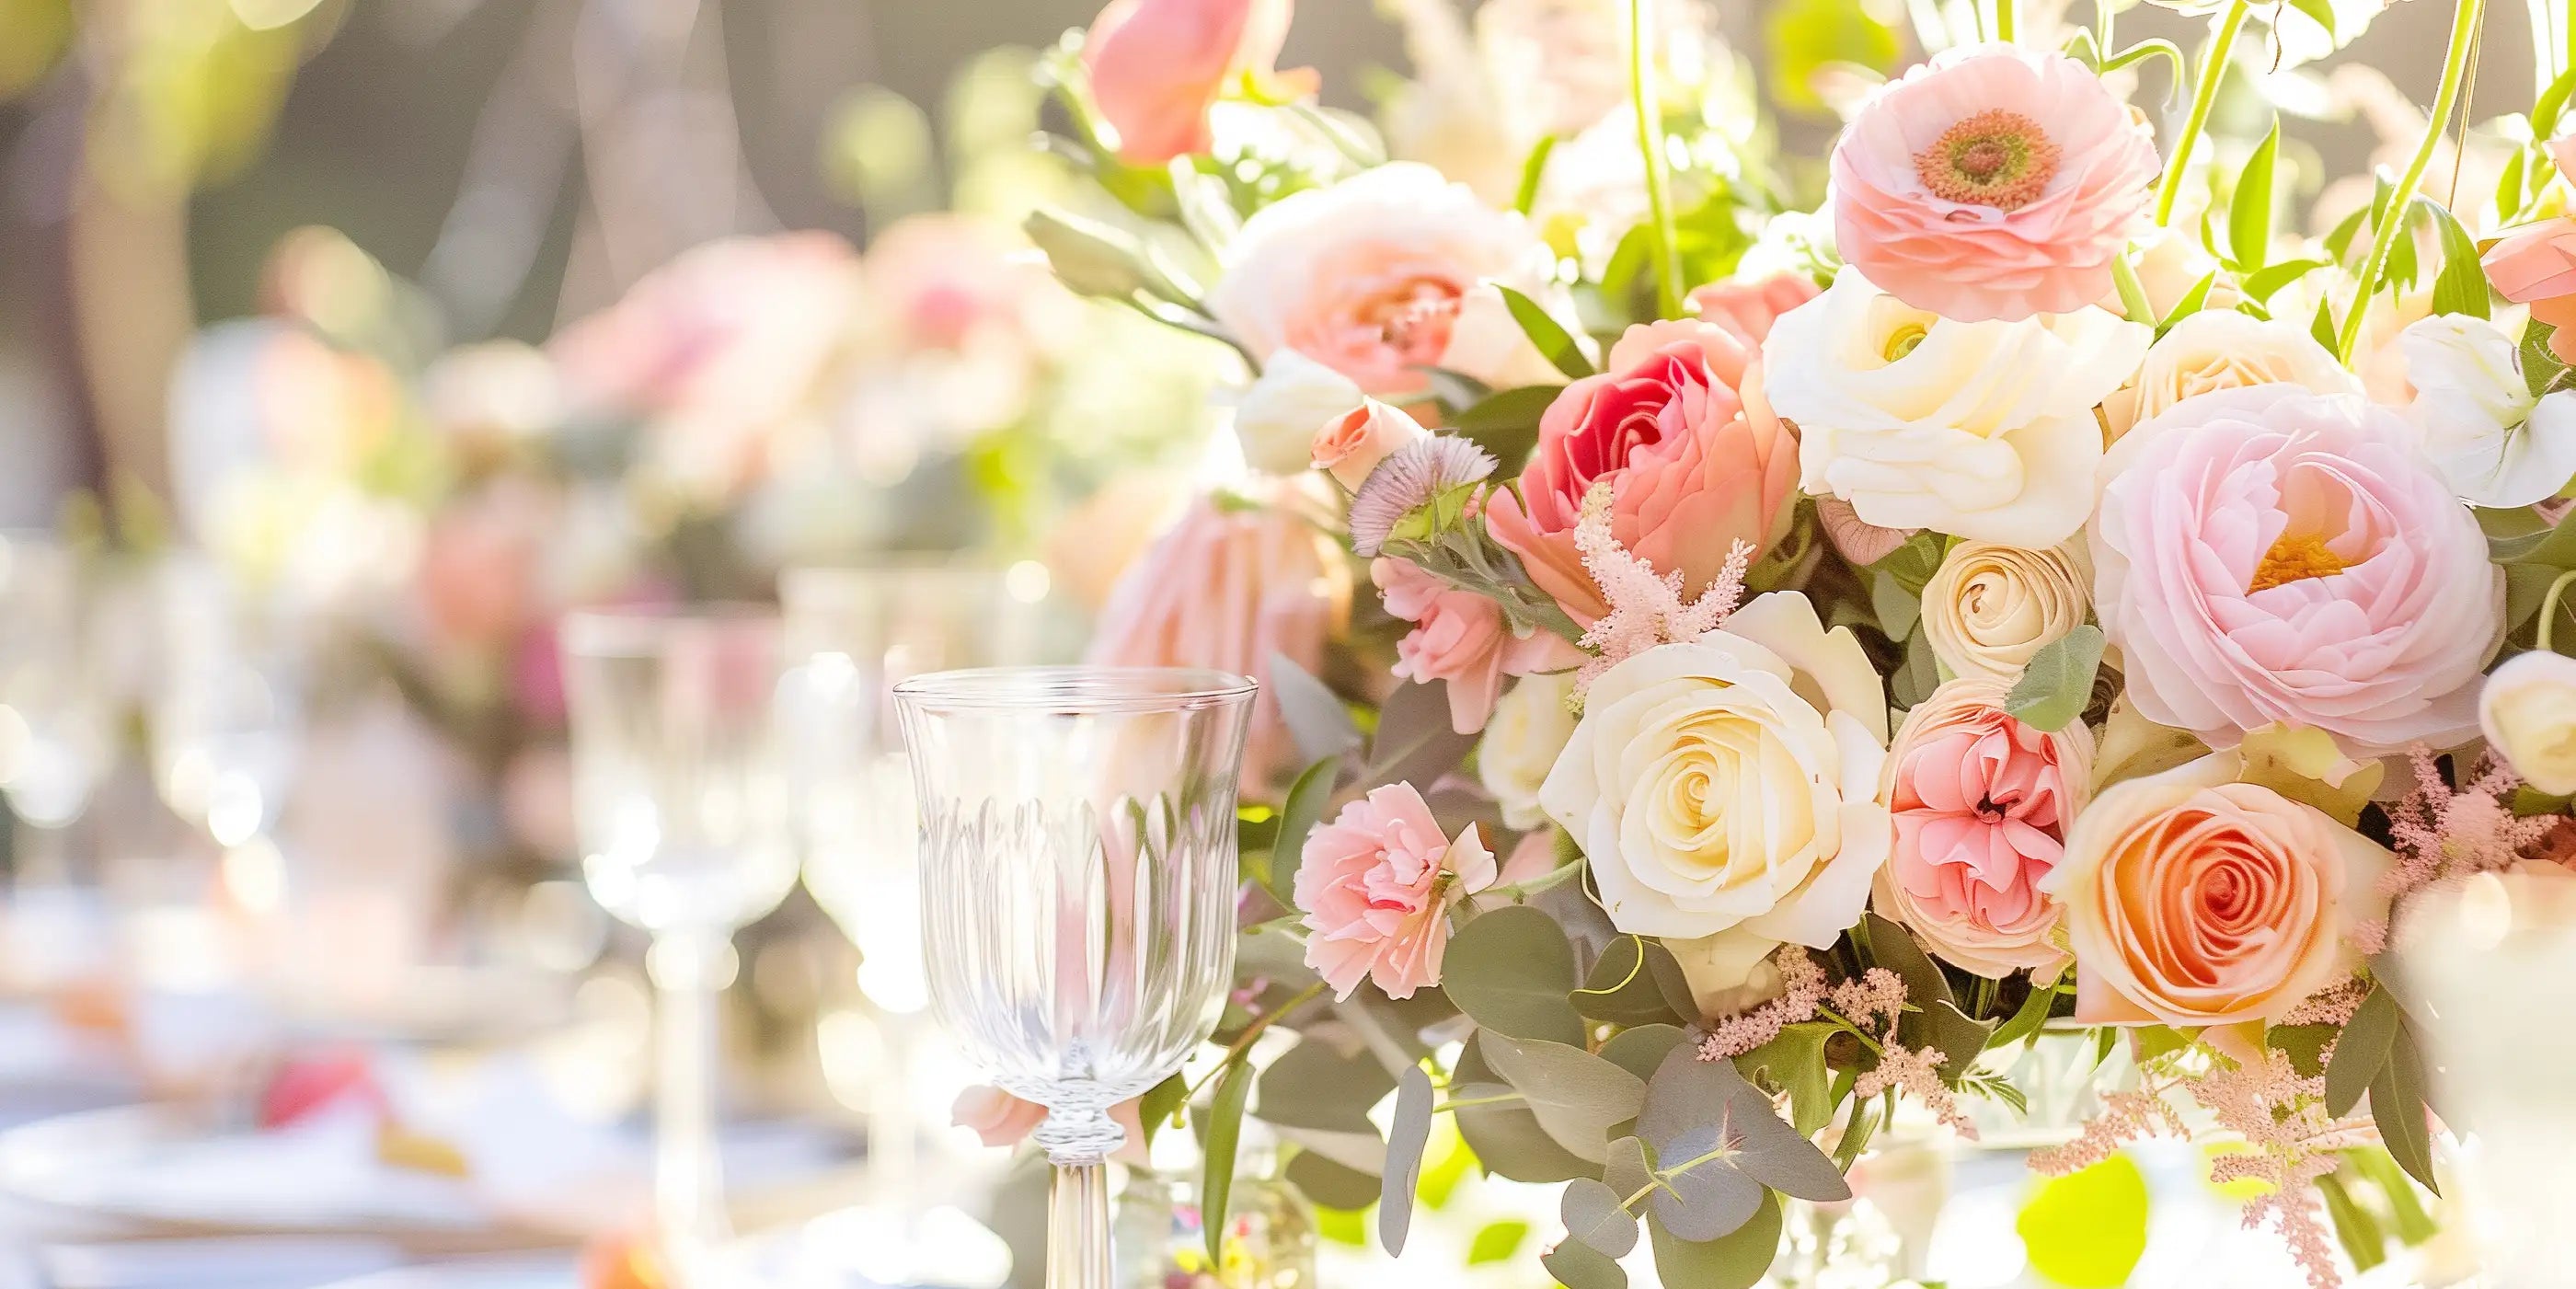 Close-up of an elegant floral arrangement featuring pink, peach, and white roses, perfect for enhancing any event. Fabulous Flowers and Gifts."